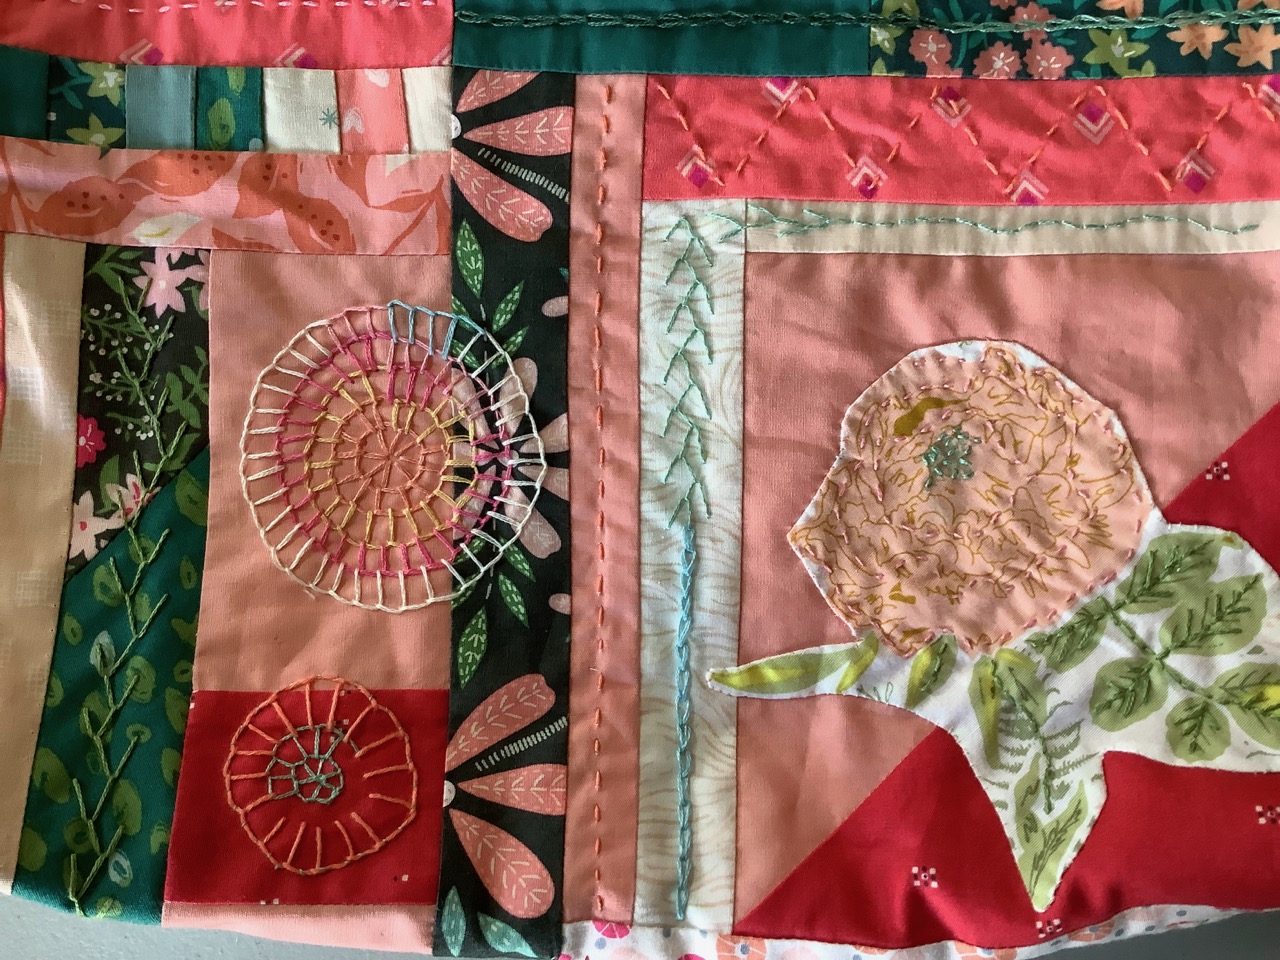 Fiber Antics by Veronica: 100 Days of Slow Stitching with found objects—a  recap